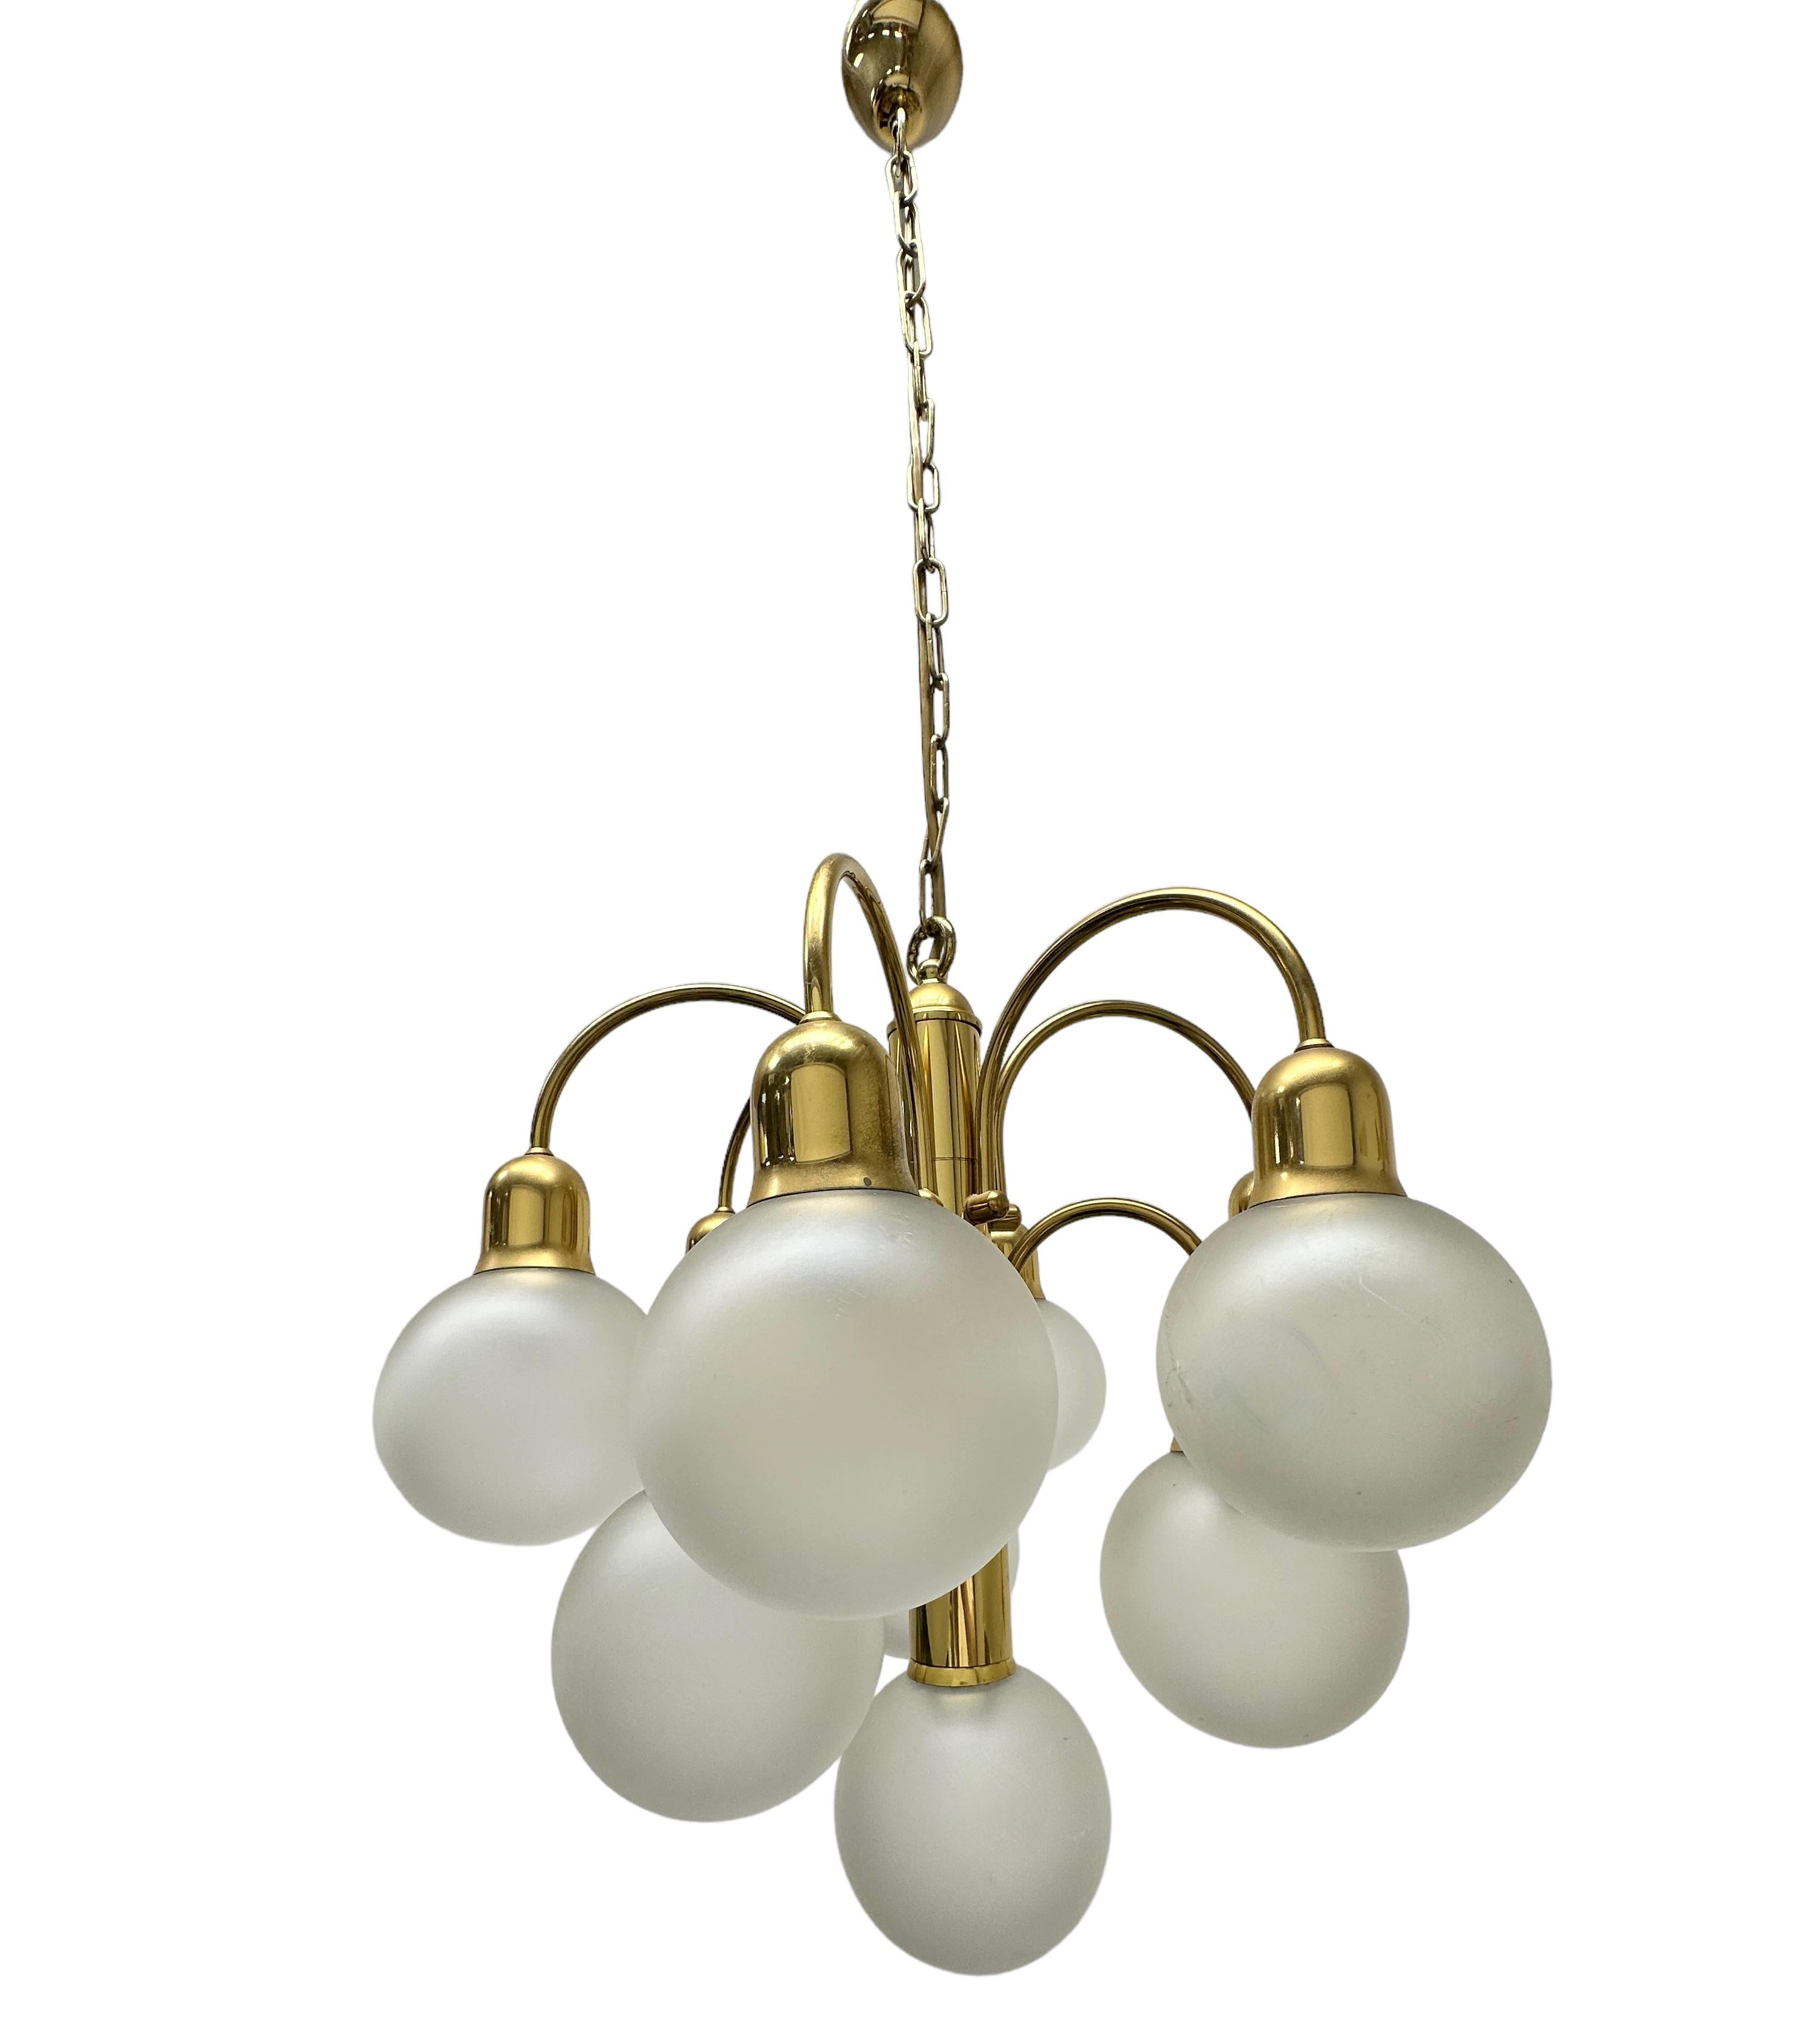 10 Light Sputnik Orbit Brass and Frosted Glass Ball Chandelier Germany, 1970s In Good Condition For Sale In Nuernberg, DE